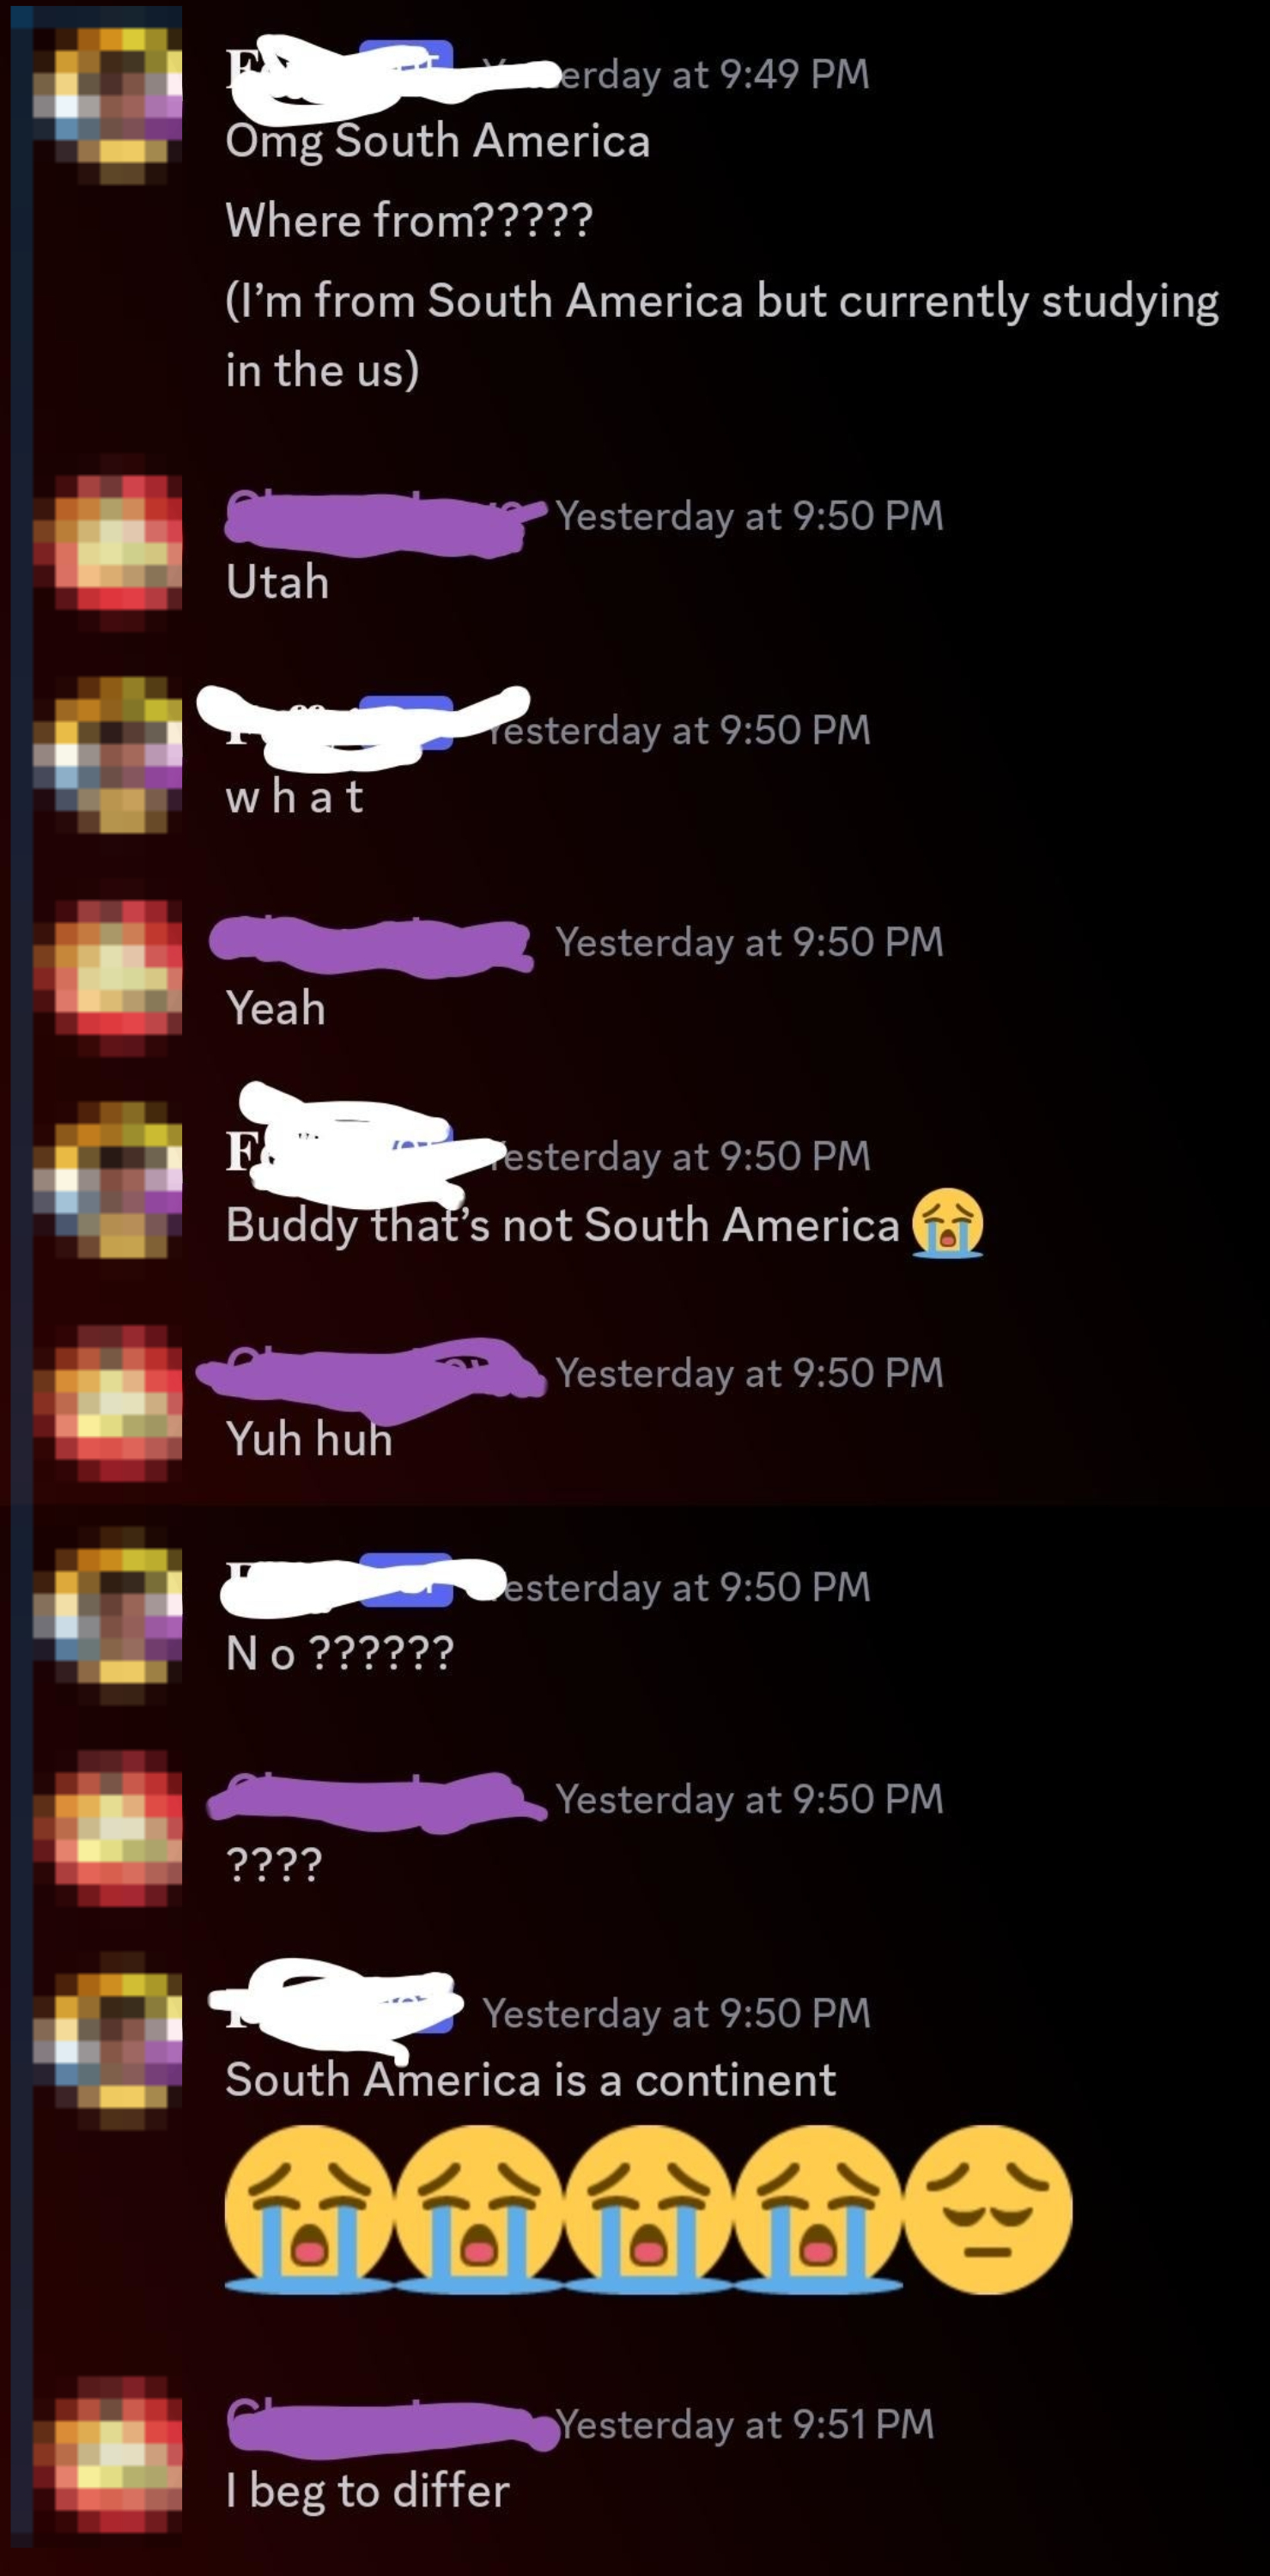 A screenshot of a messaging app where one user incorrectly states South America is a country and another corrects them, humorous confusion ensues